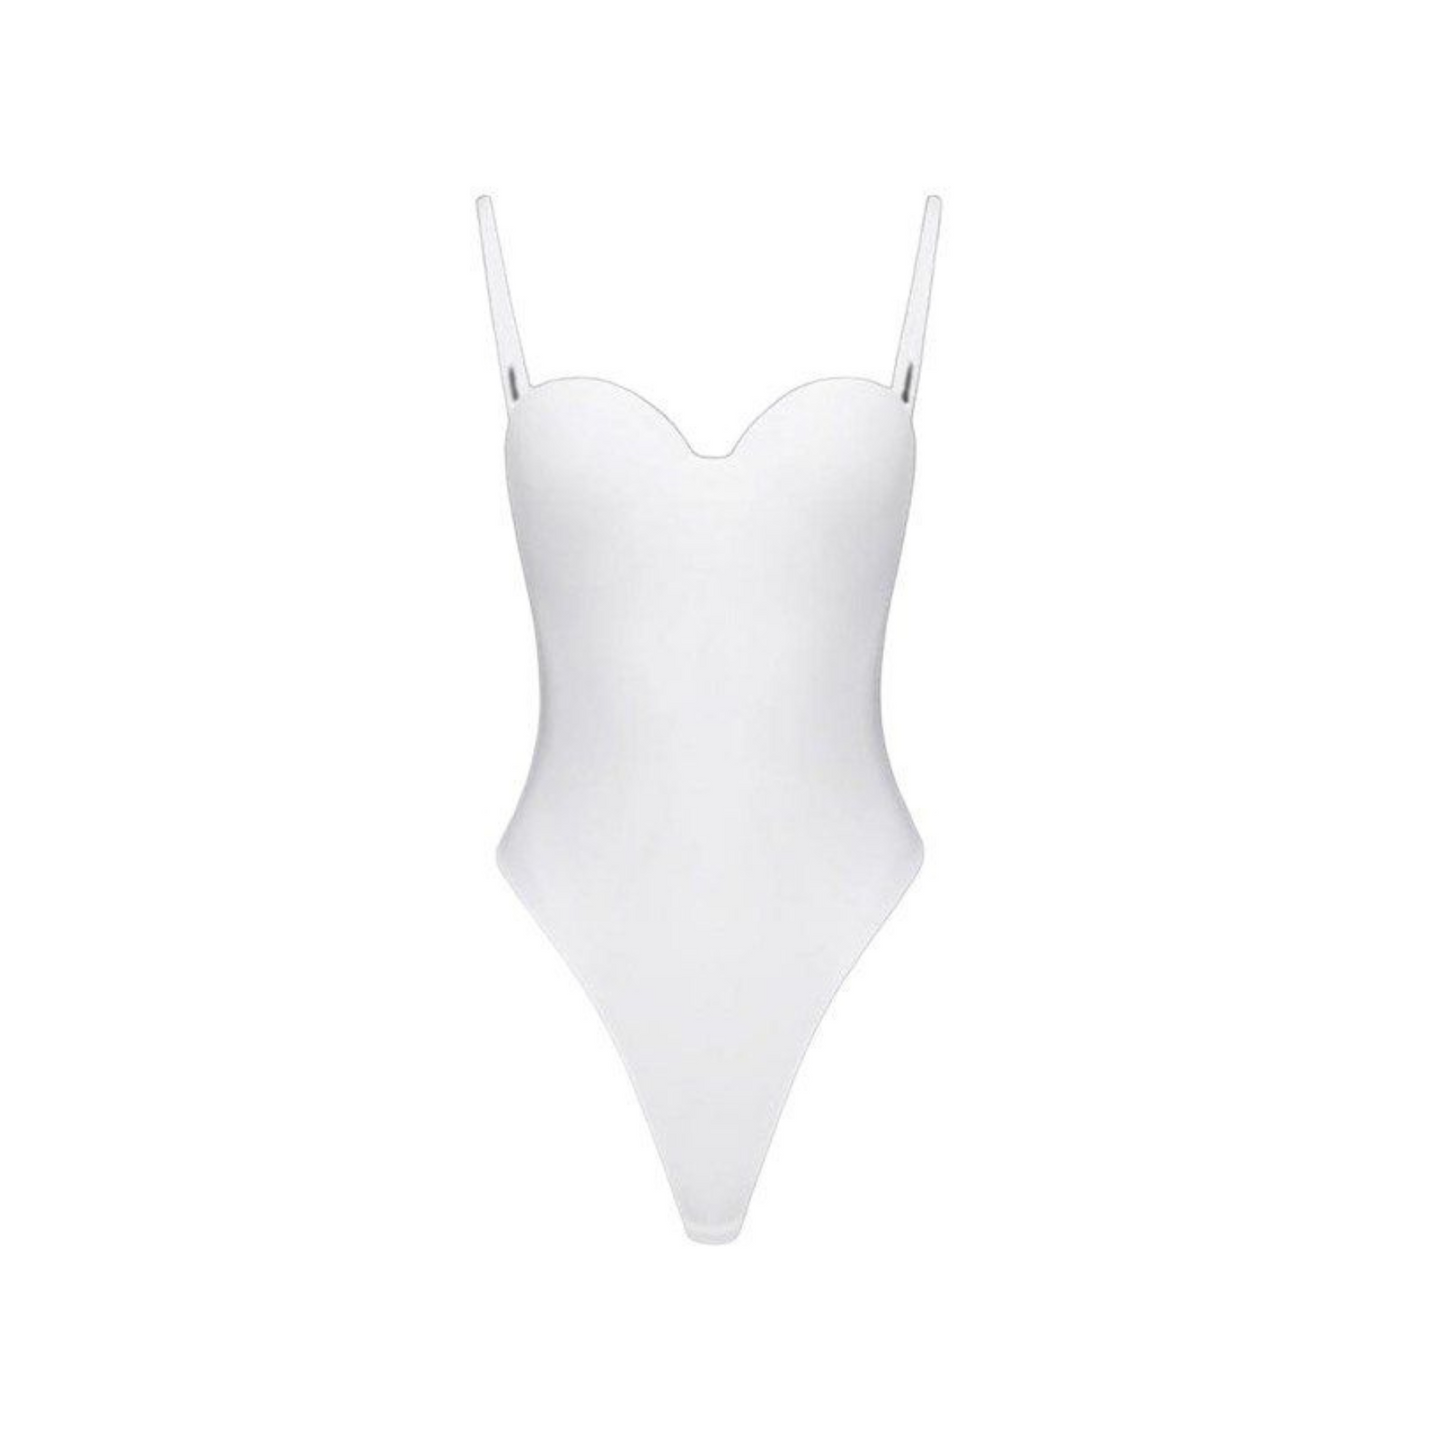 Victoria forming white string bodysuit: Shape Your Confidence with Style